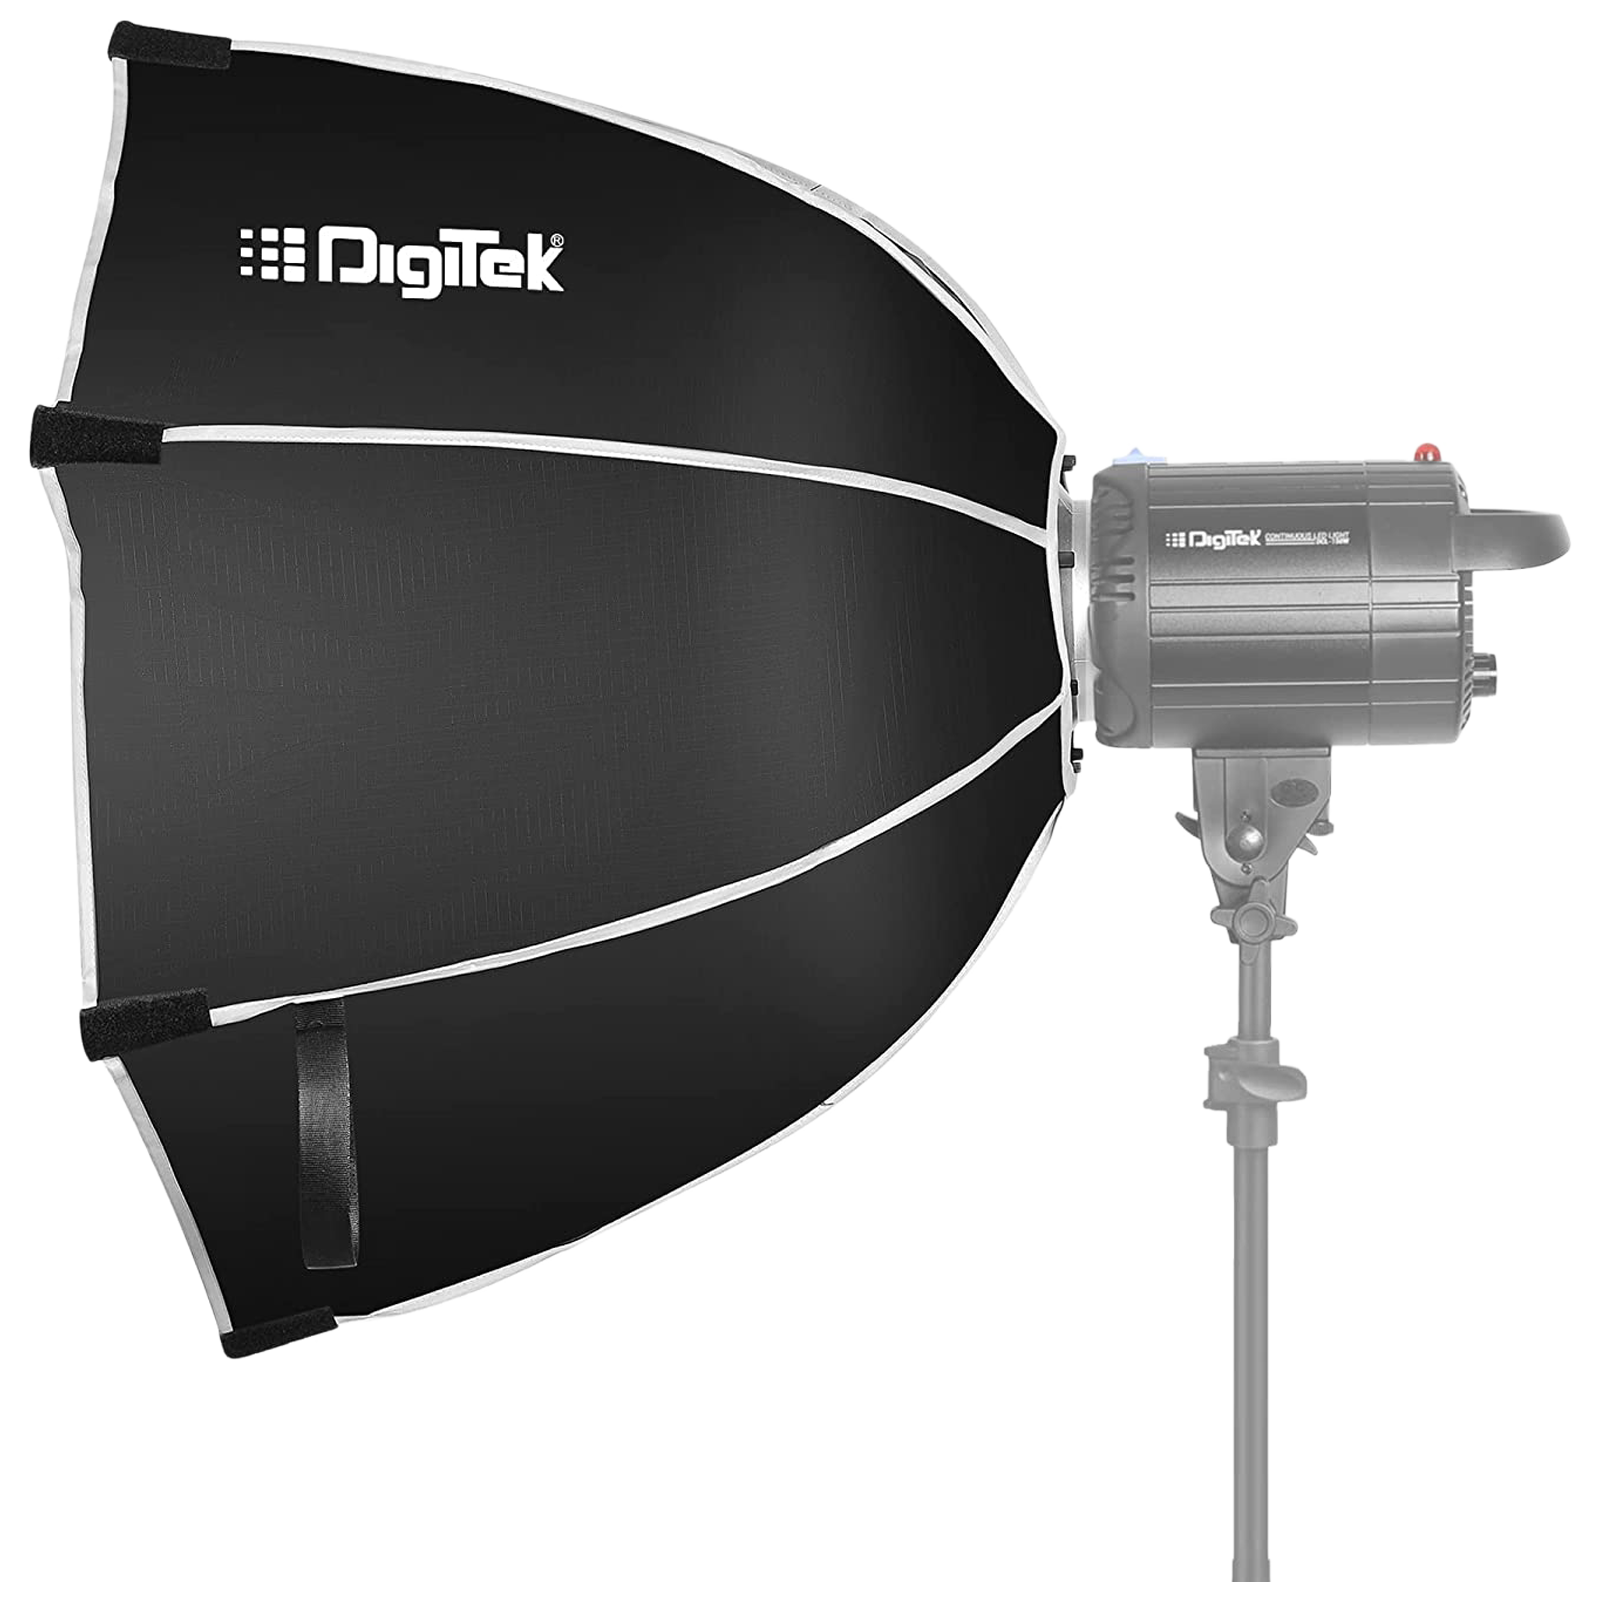 DigiTek Octagon Bowens Softbox with Diffuser Sheets & Carrying Case for Still Photography (Lightweight & Portable)